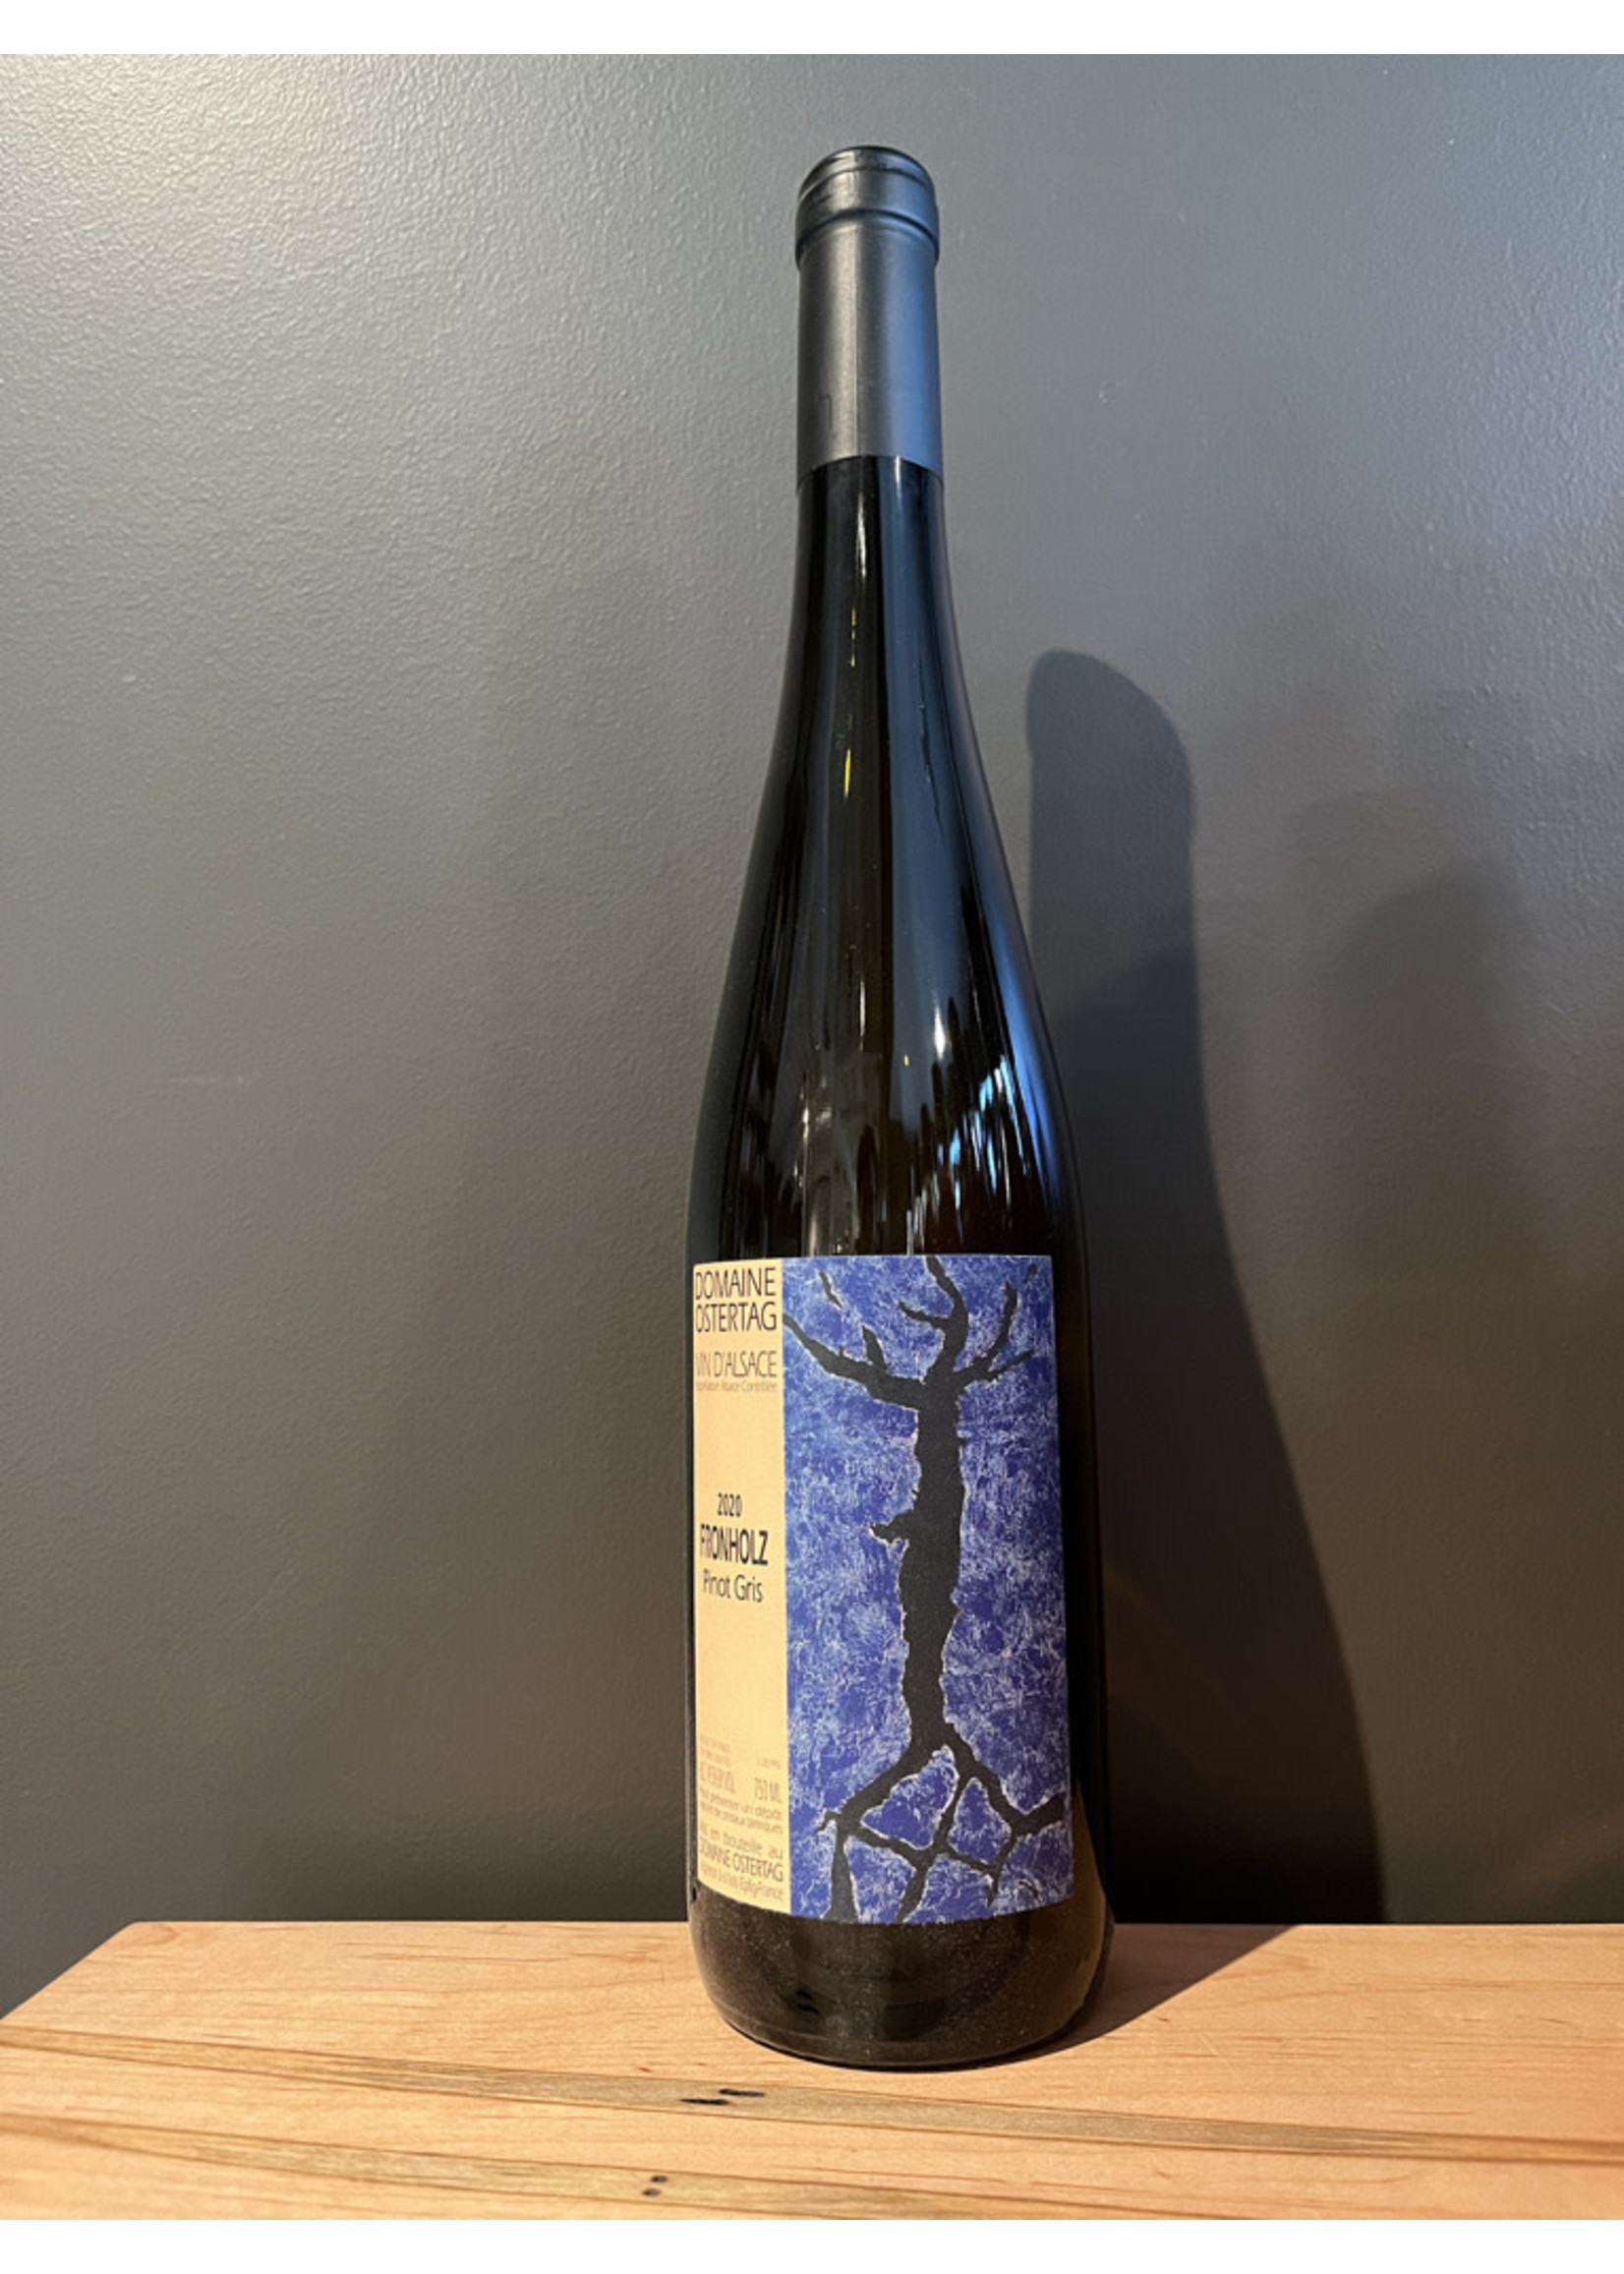 Kermit Lynch Wines Ostertag - Pinot Gris Fronholz 2020